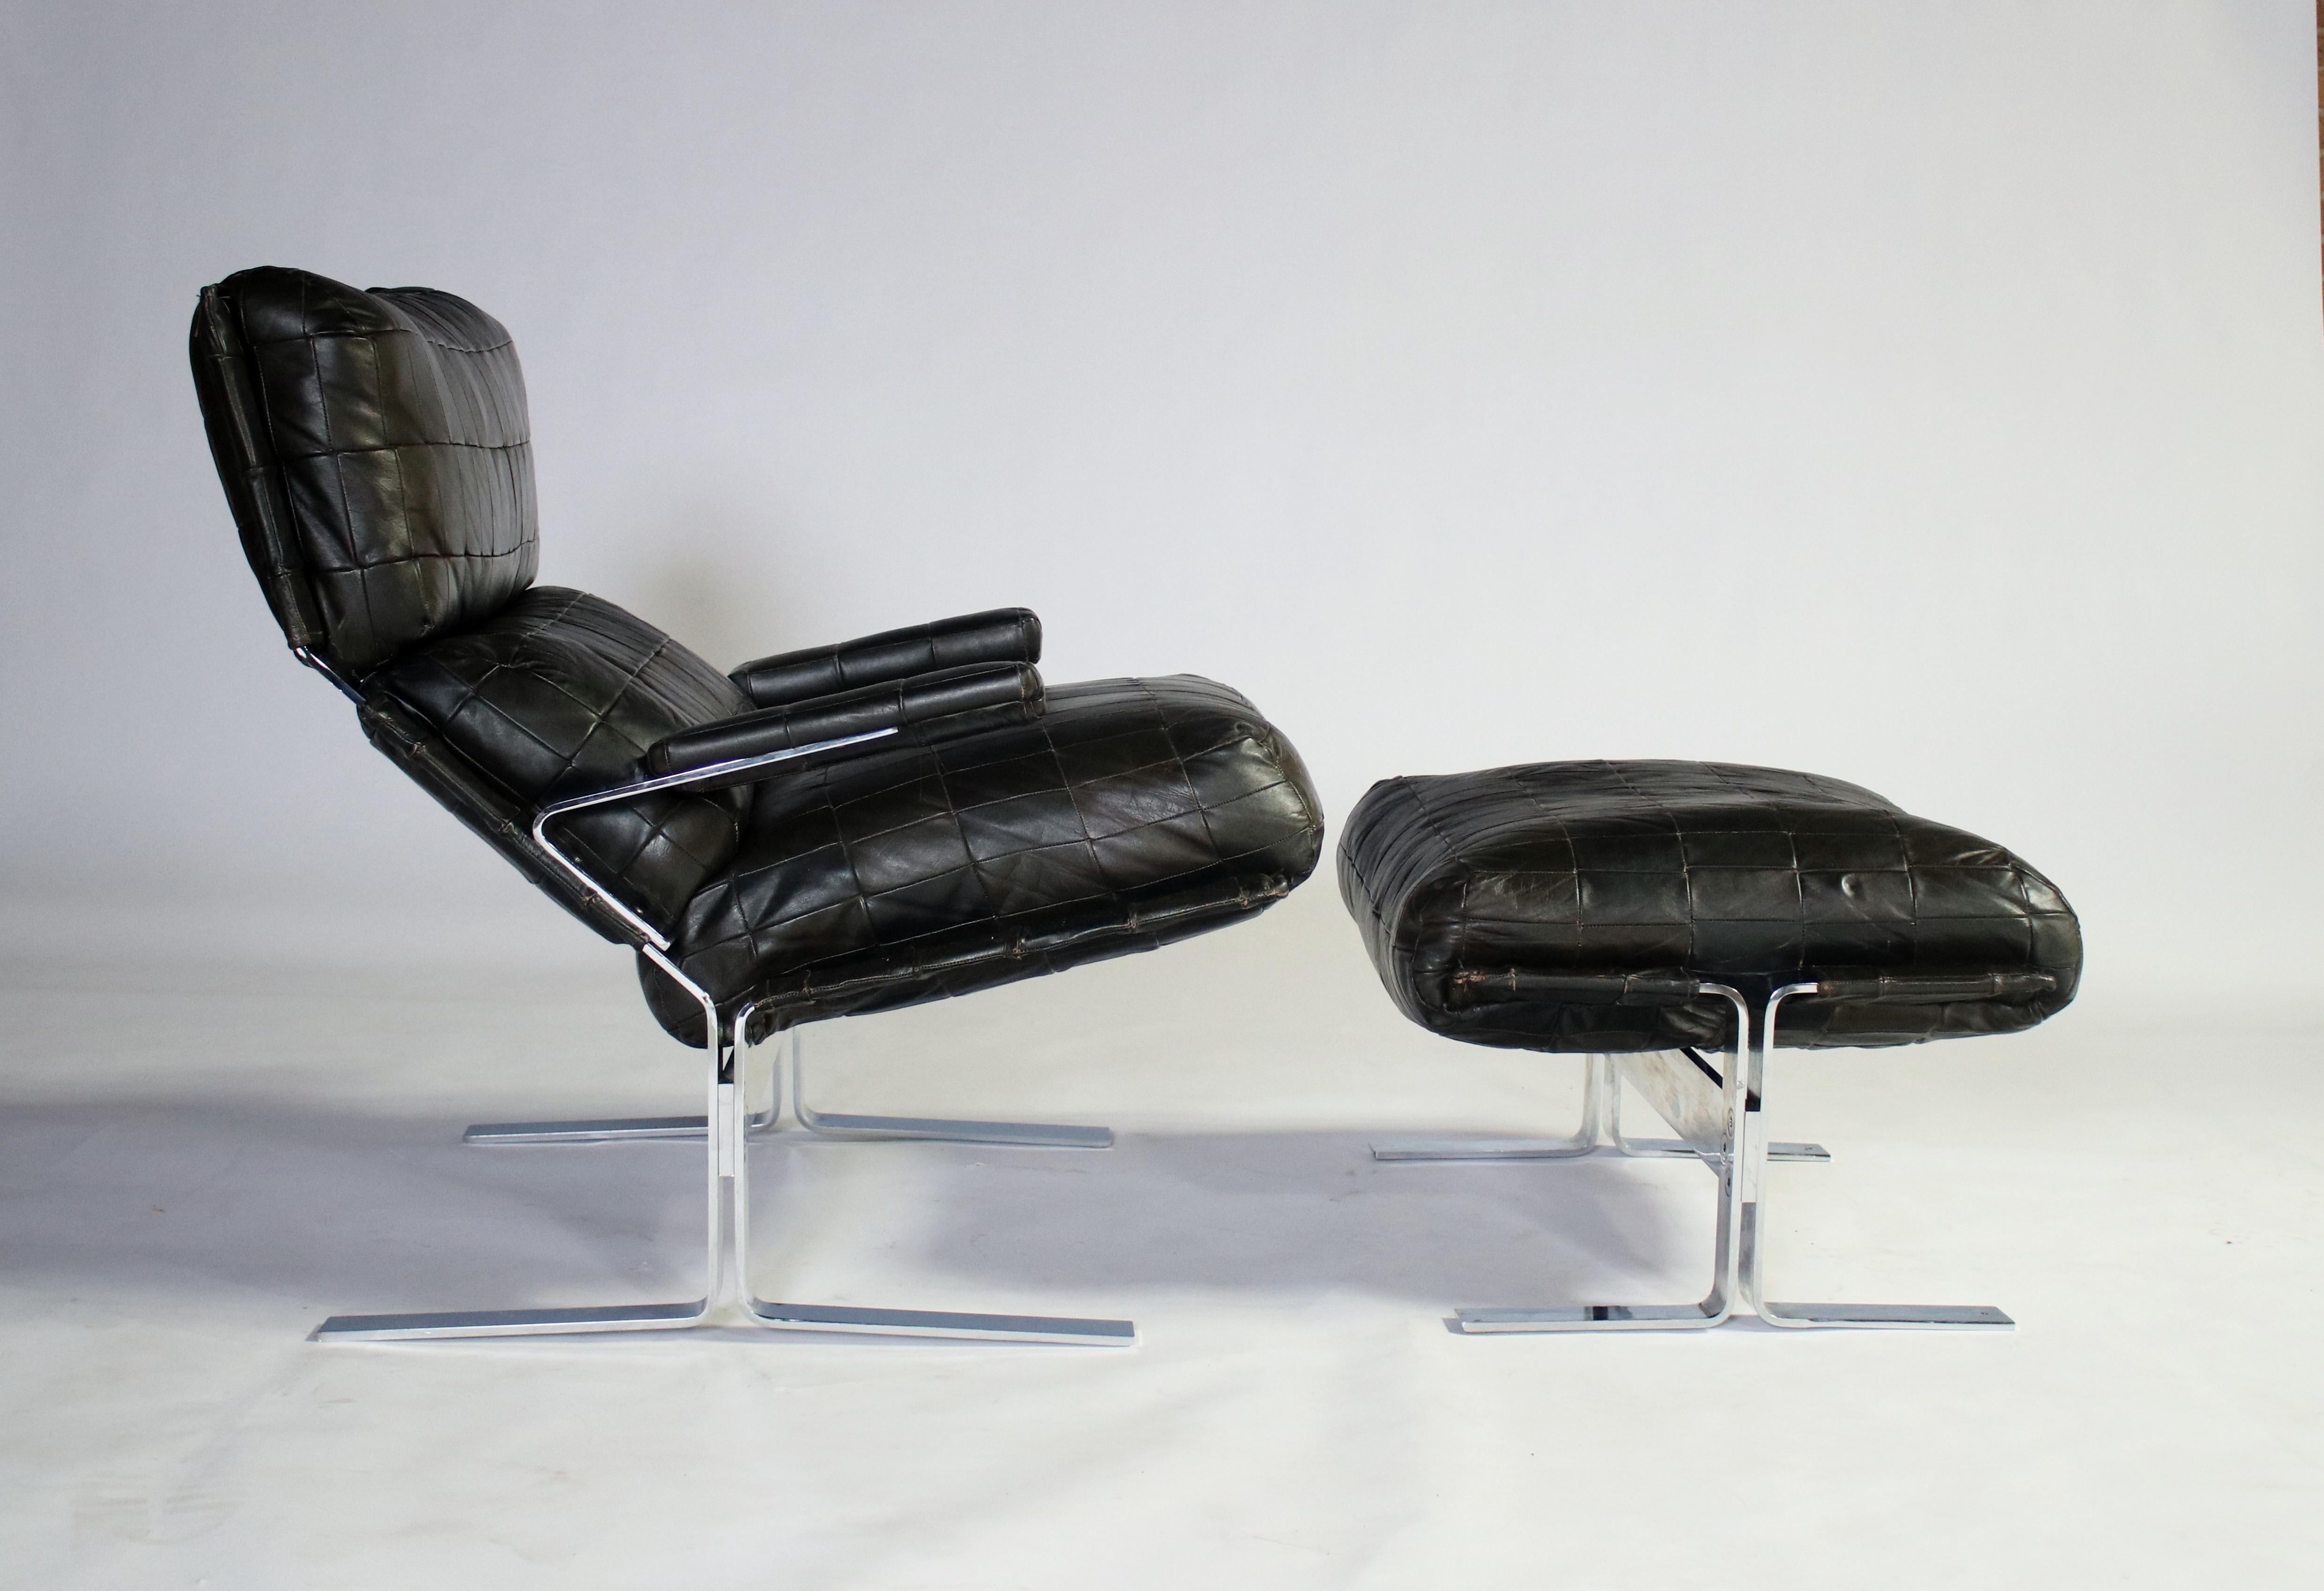 1970s patchwork leather upholstered cushions on polished steel lounge chair and ottoman by Richard Herberger for Saporiti. The steel and leather has been newly polished, and restored and the cushions have been reshaped with new stuffing, all showing